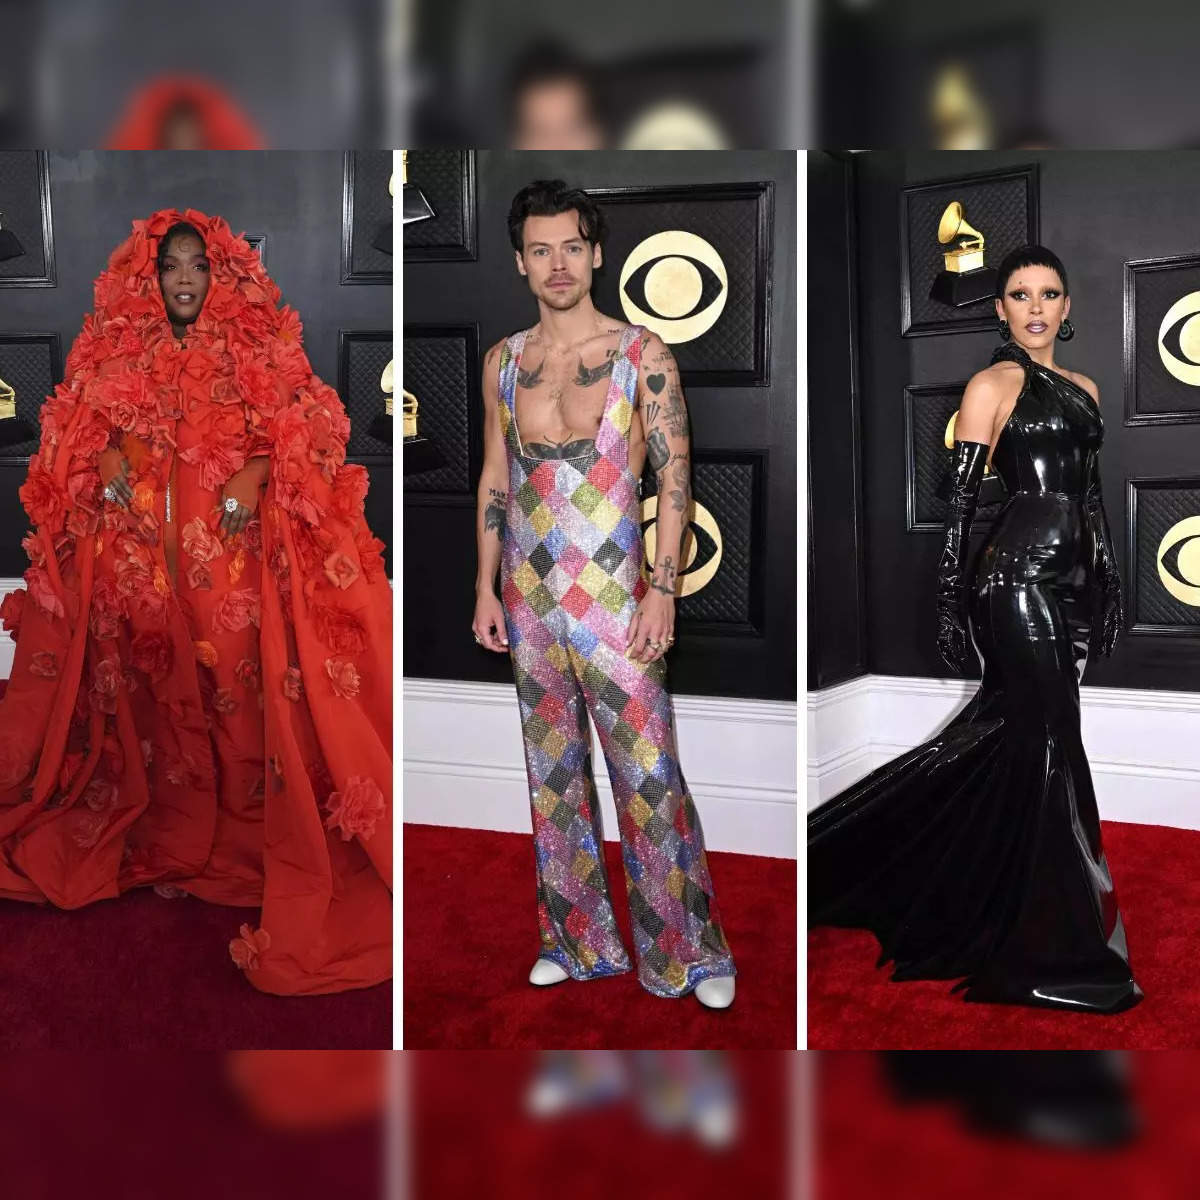 High fashion: Lizzo, Harry Styles, Doja Cat dazzle on Grammys red carpet  with wild patterns, blinged-out couture - The Economic Times